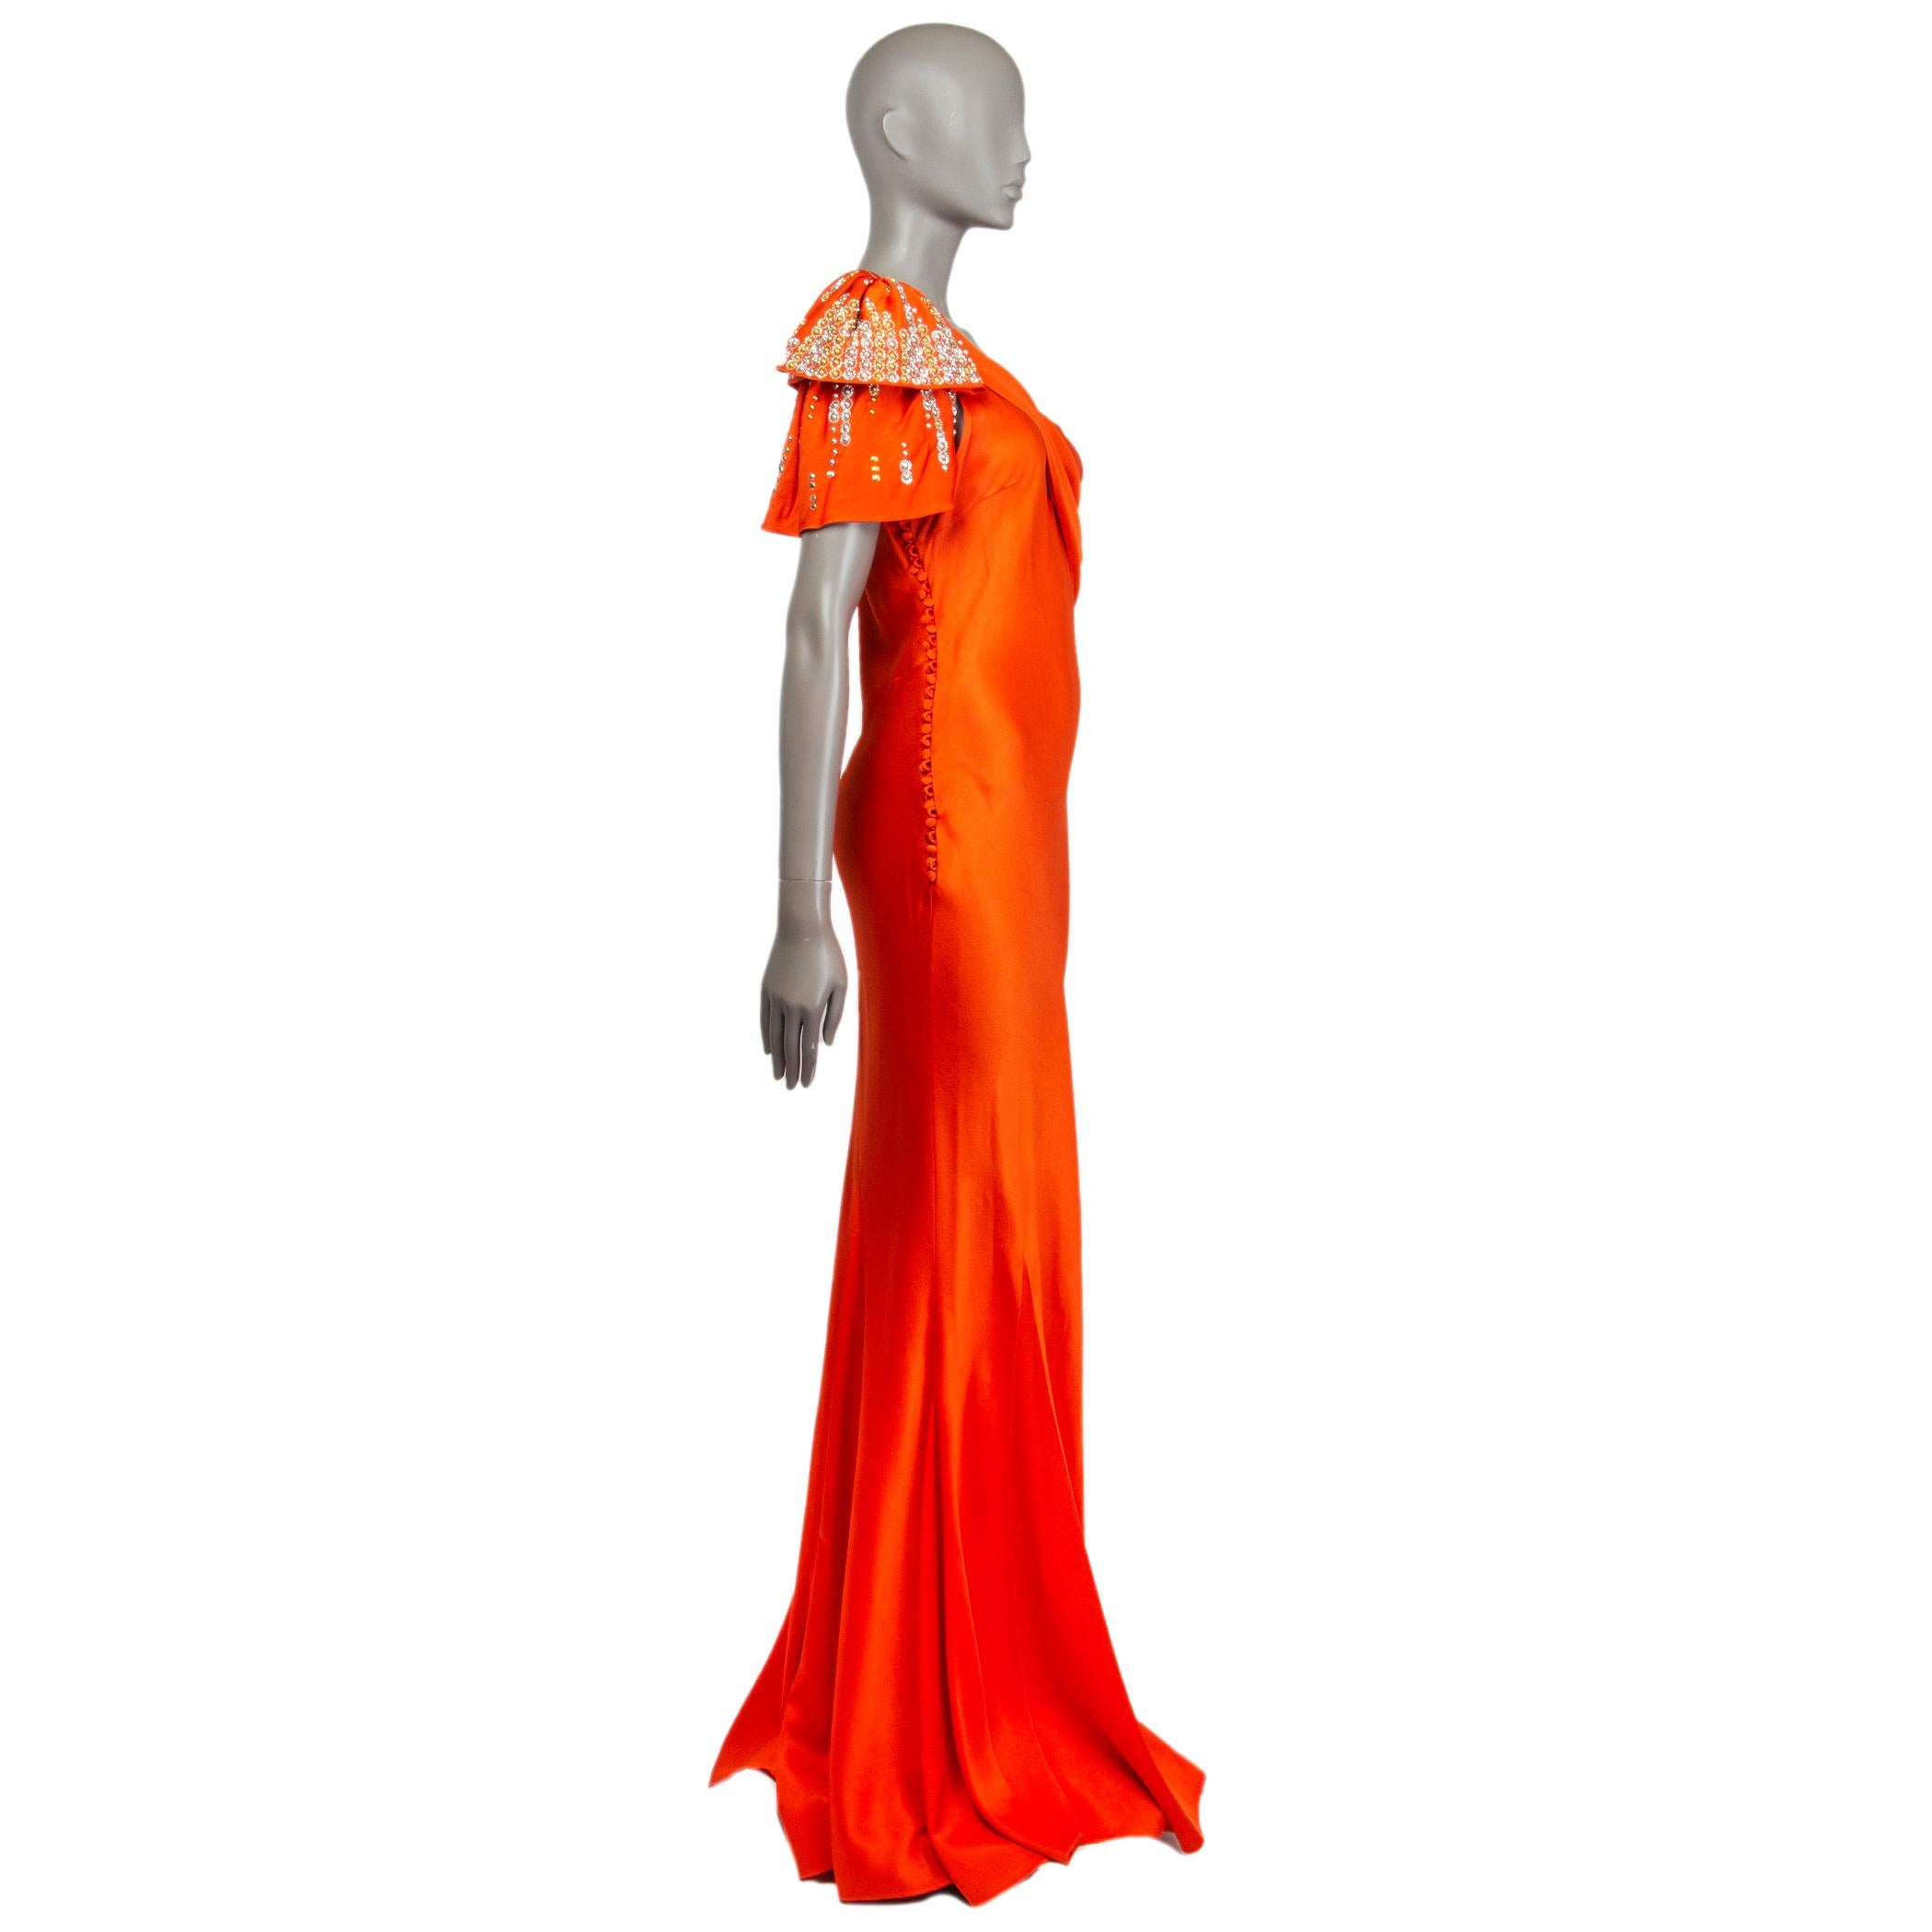 Christian Dior one-shoulder gown in orange satin acetate (68%) and viscose (32%). With godet skirt and beaded shoulder draping that pleats diagonally around the bust. Closes with one hool and fabric-lined buttons down the side. Unlined. Has been